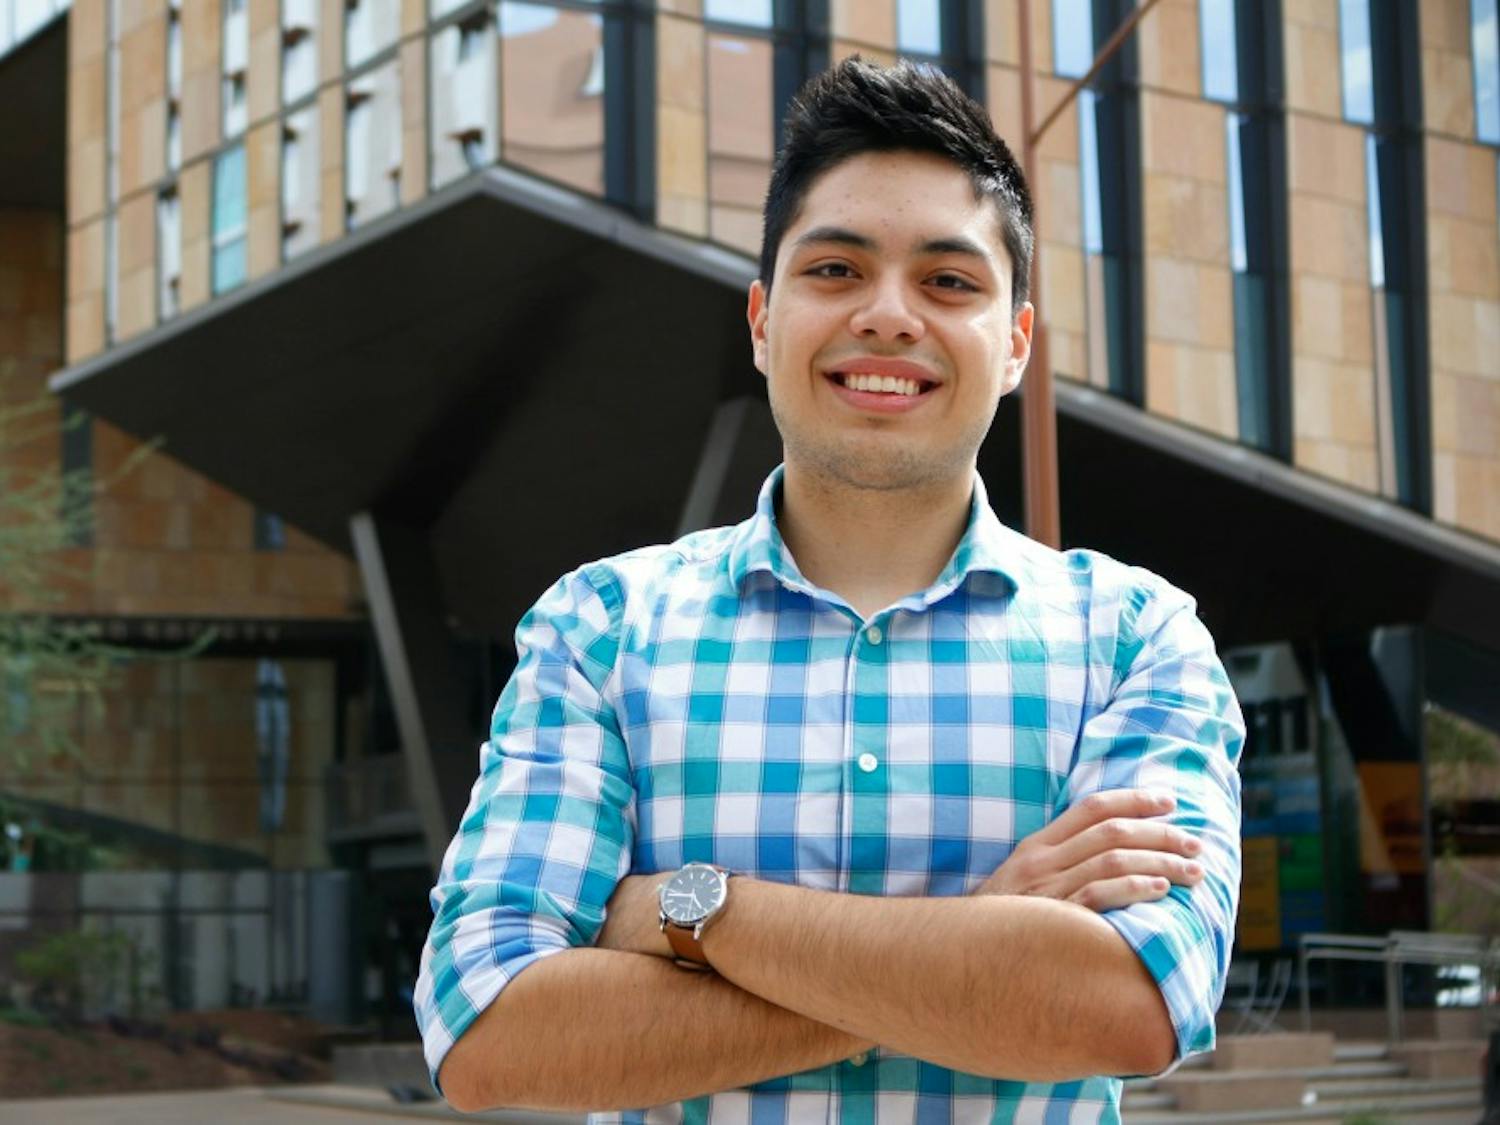 ASU junior public policy student and DACA recipient Oscar Hernandez poses for a portrait in downtown Phoenix on Friday, Feb. 17, 2017